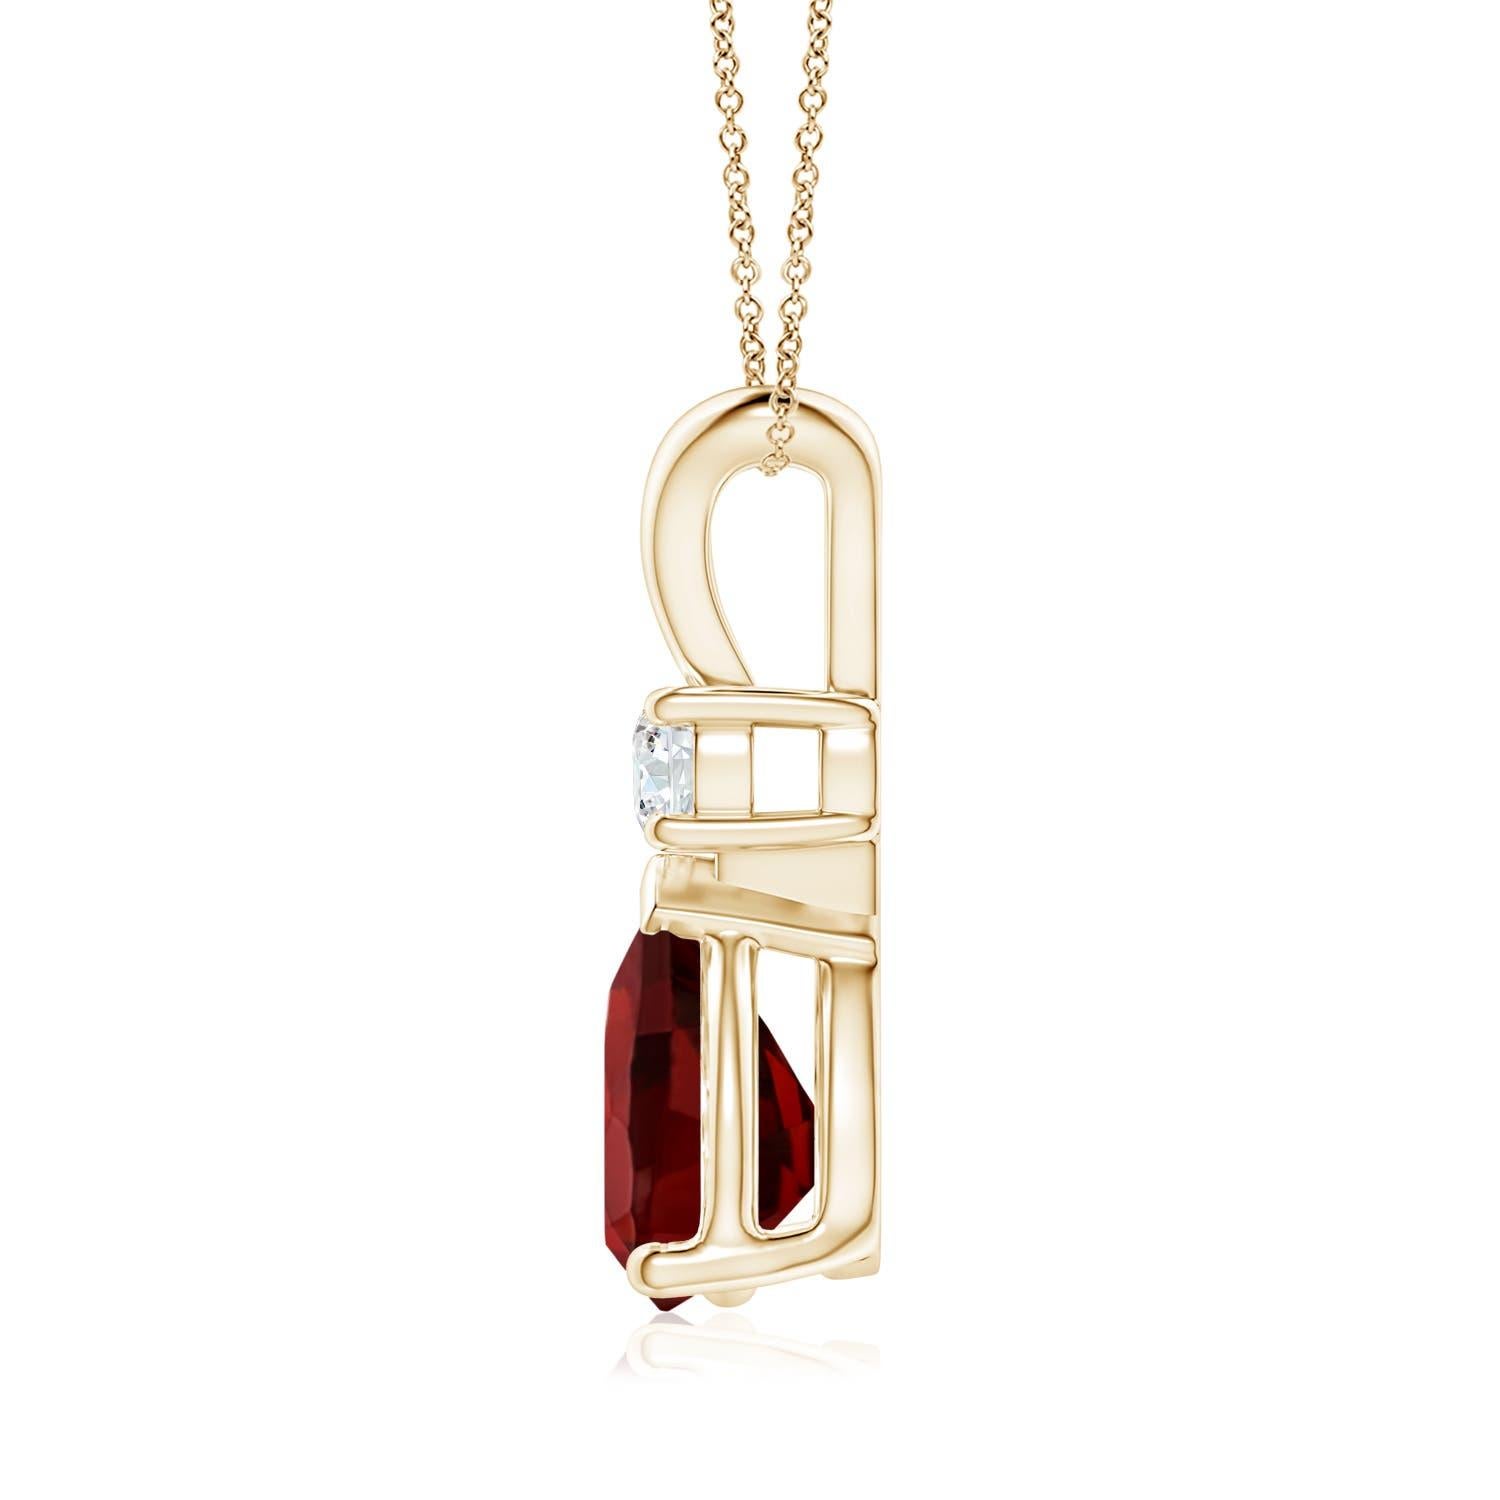 A pear-shaped intense red garnet is secured in a prong setting and embellished with a diamond accent on the top. Simple yet stunning, this teardrop garnet pendant with V bale is sculpted in 14k yellow gold.
Garnet is the Birthstone for January and